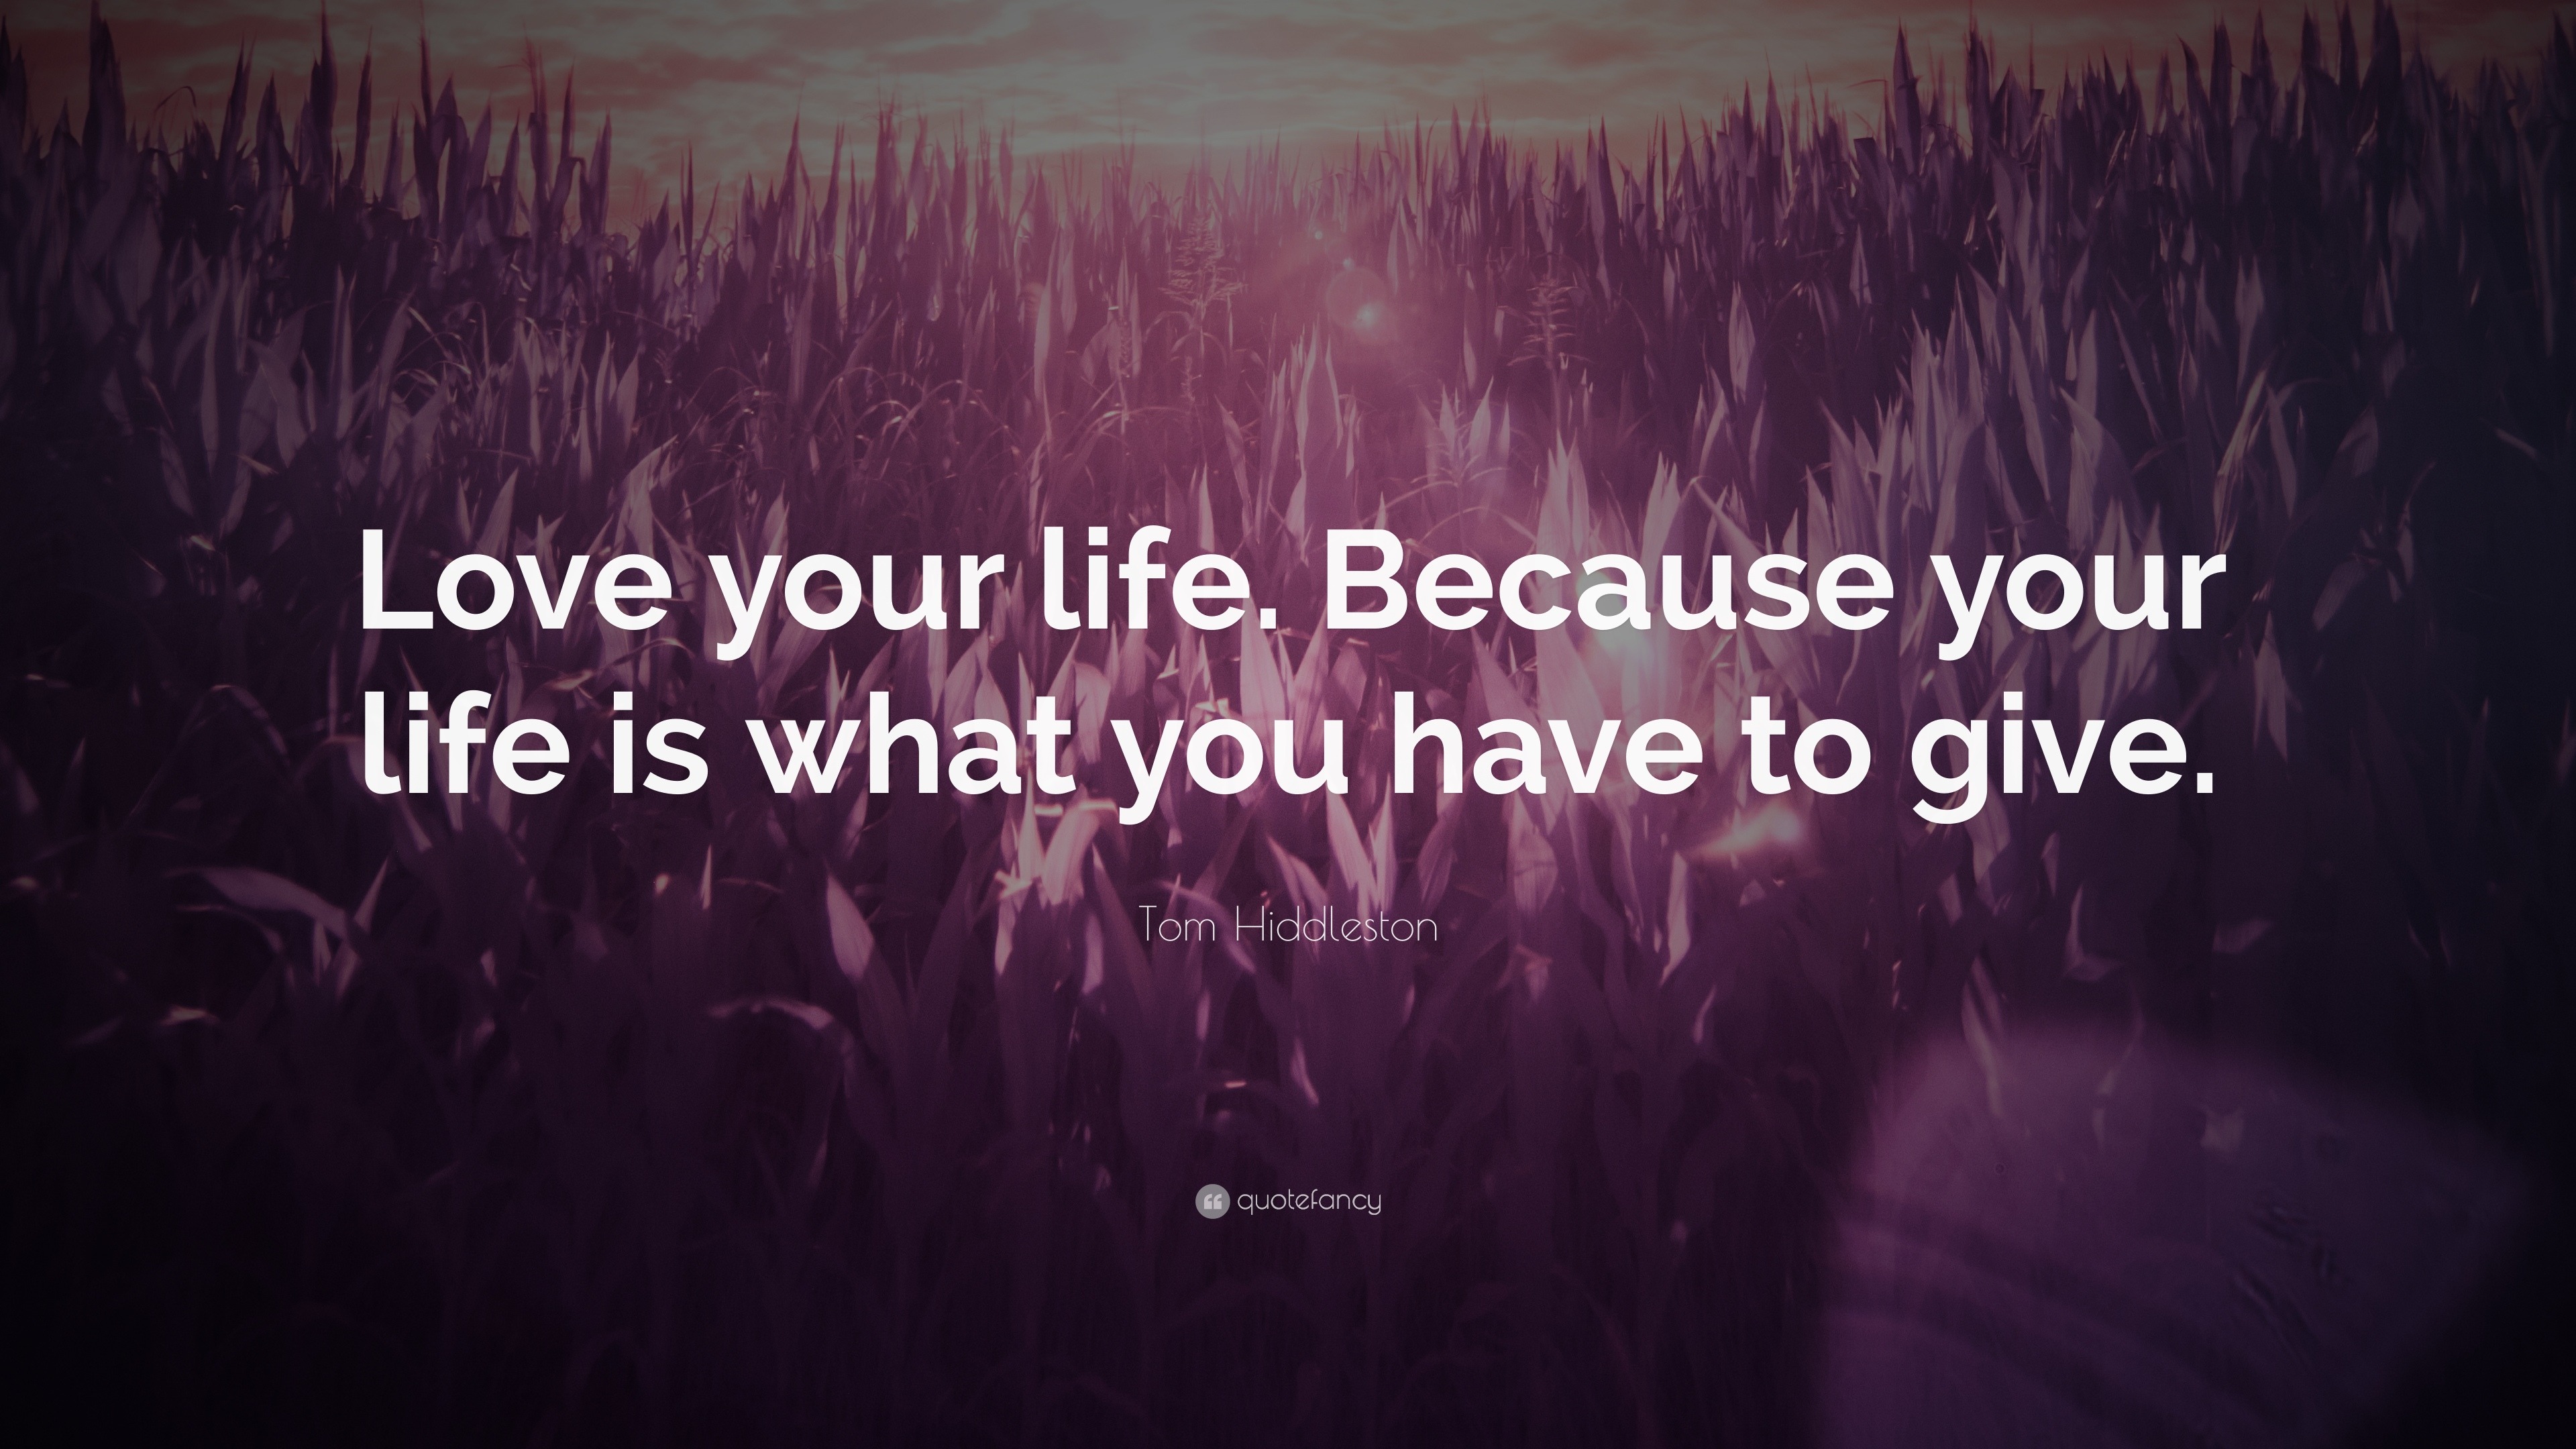 Because your life is what you have to give. 